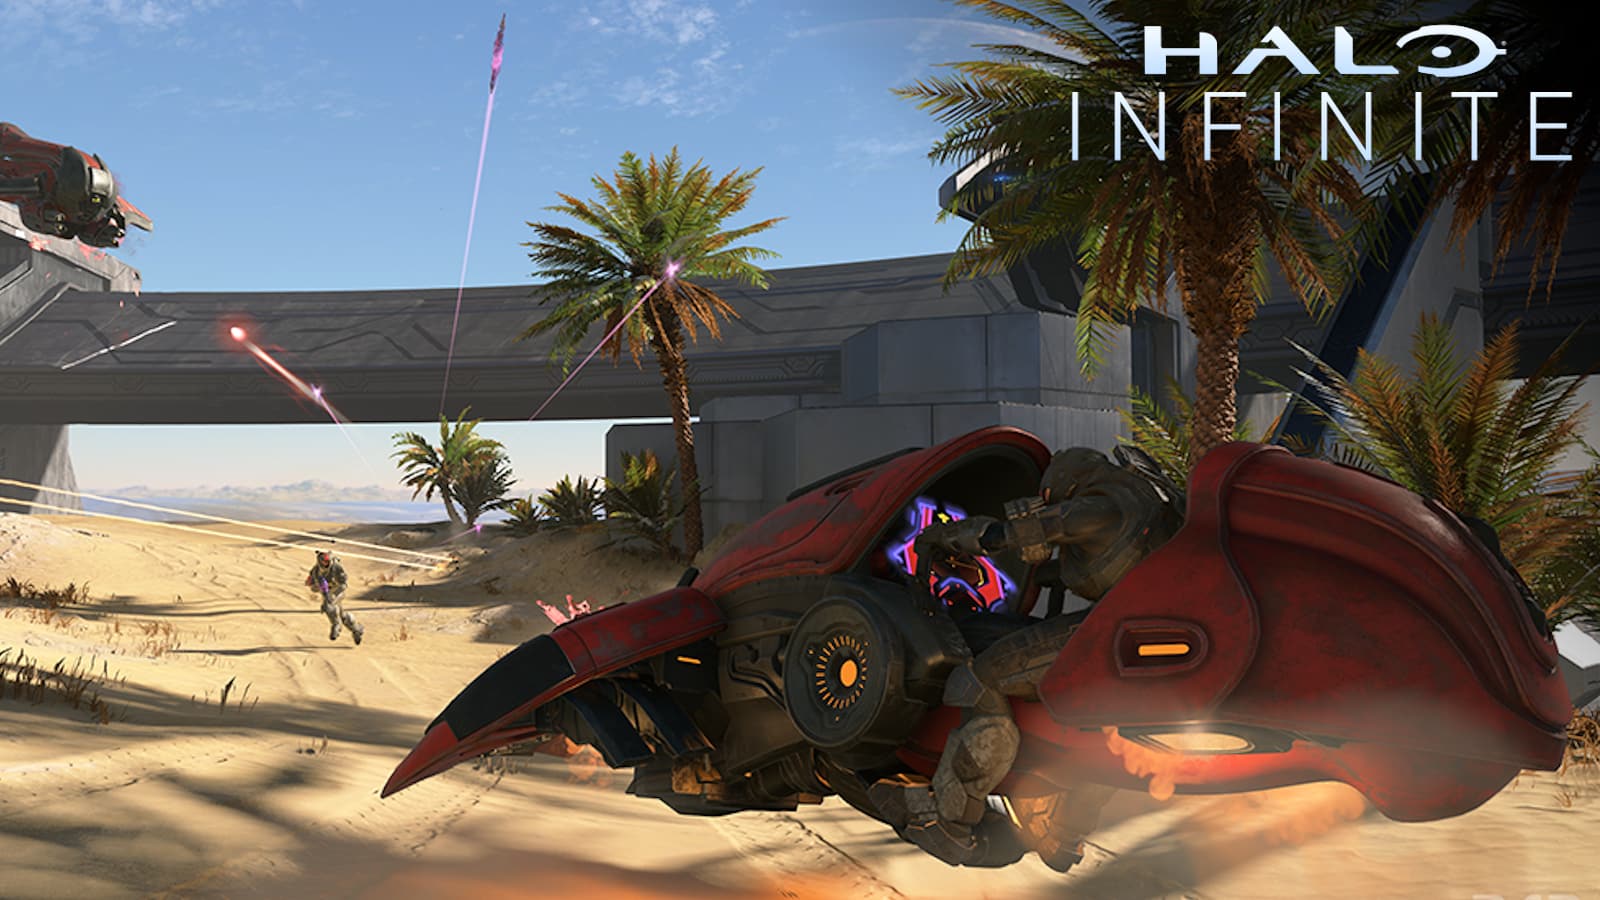 A Halo vehicle speeds along sand, with the Infinite logo in the corner